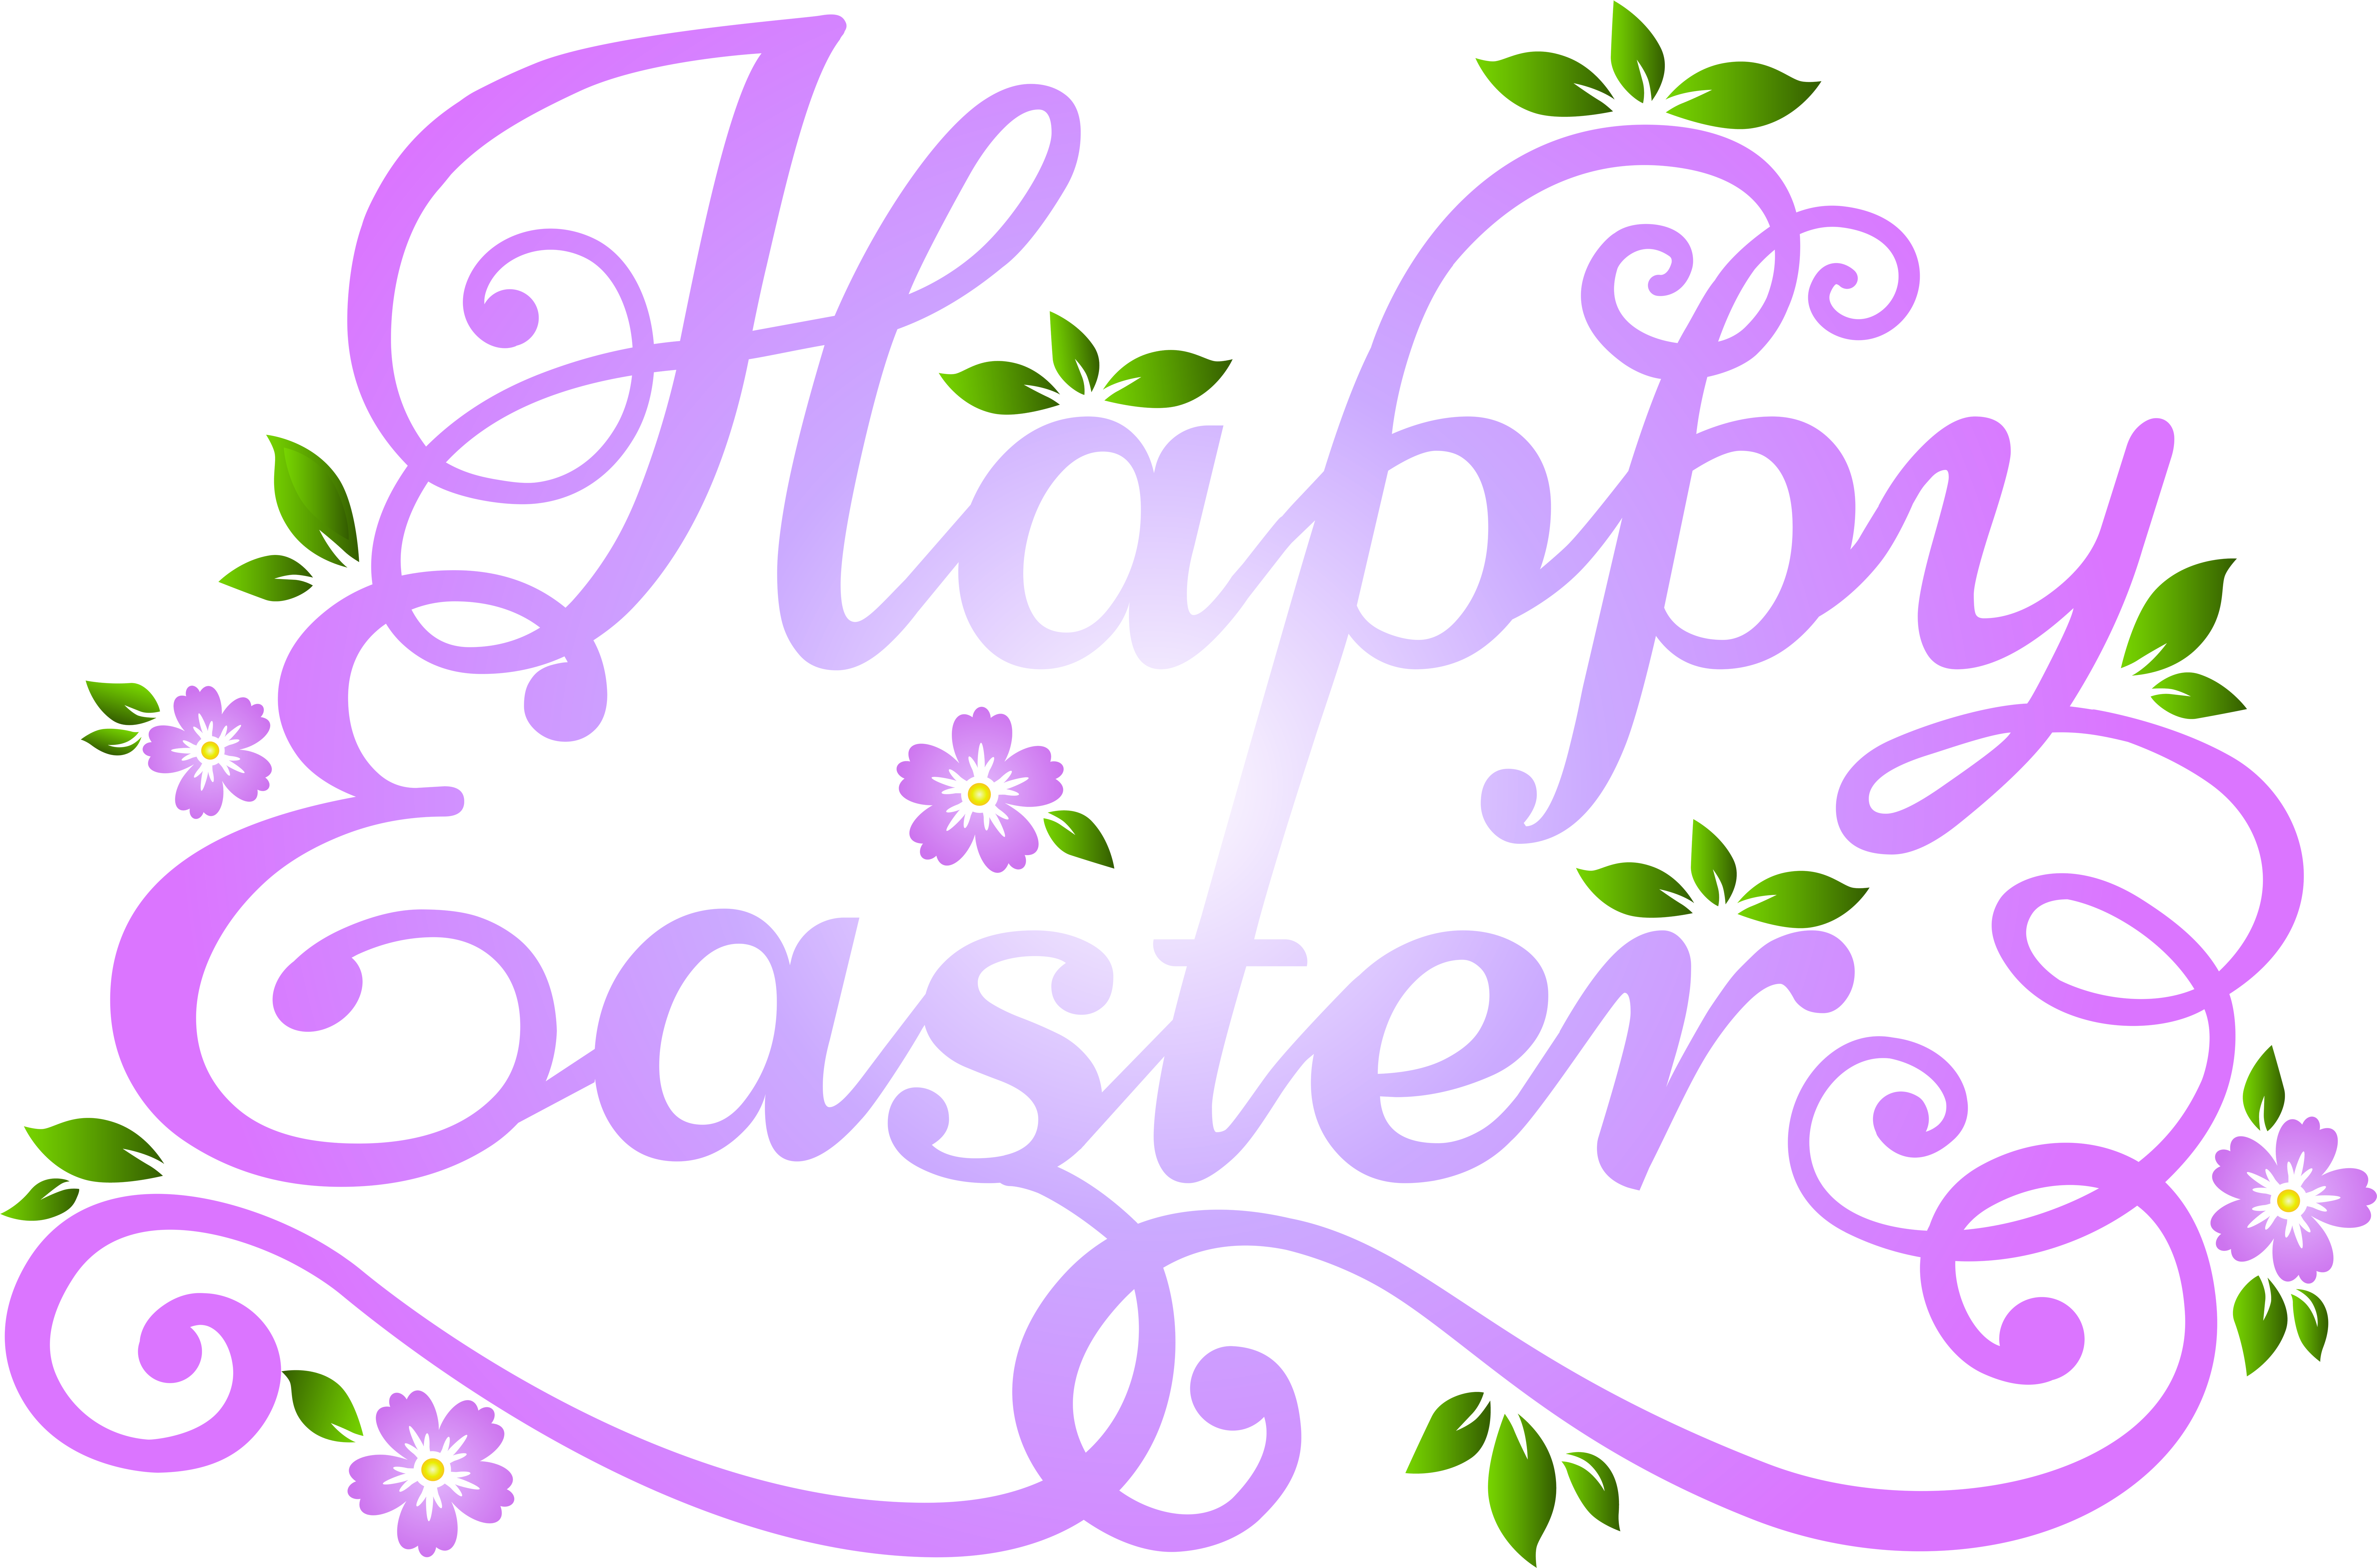 Free Vector Graphic - Easter (8000x5276)